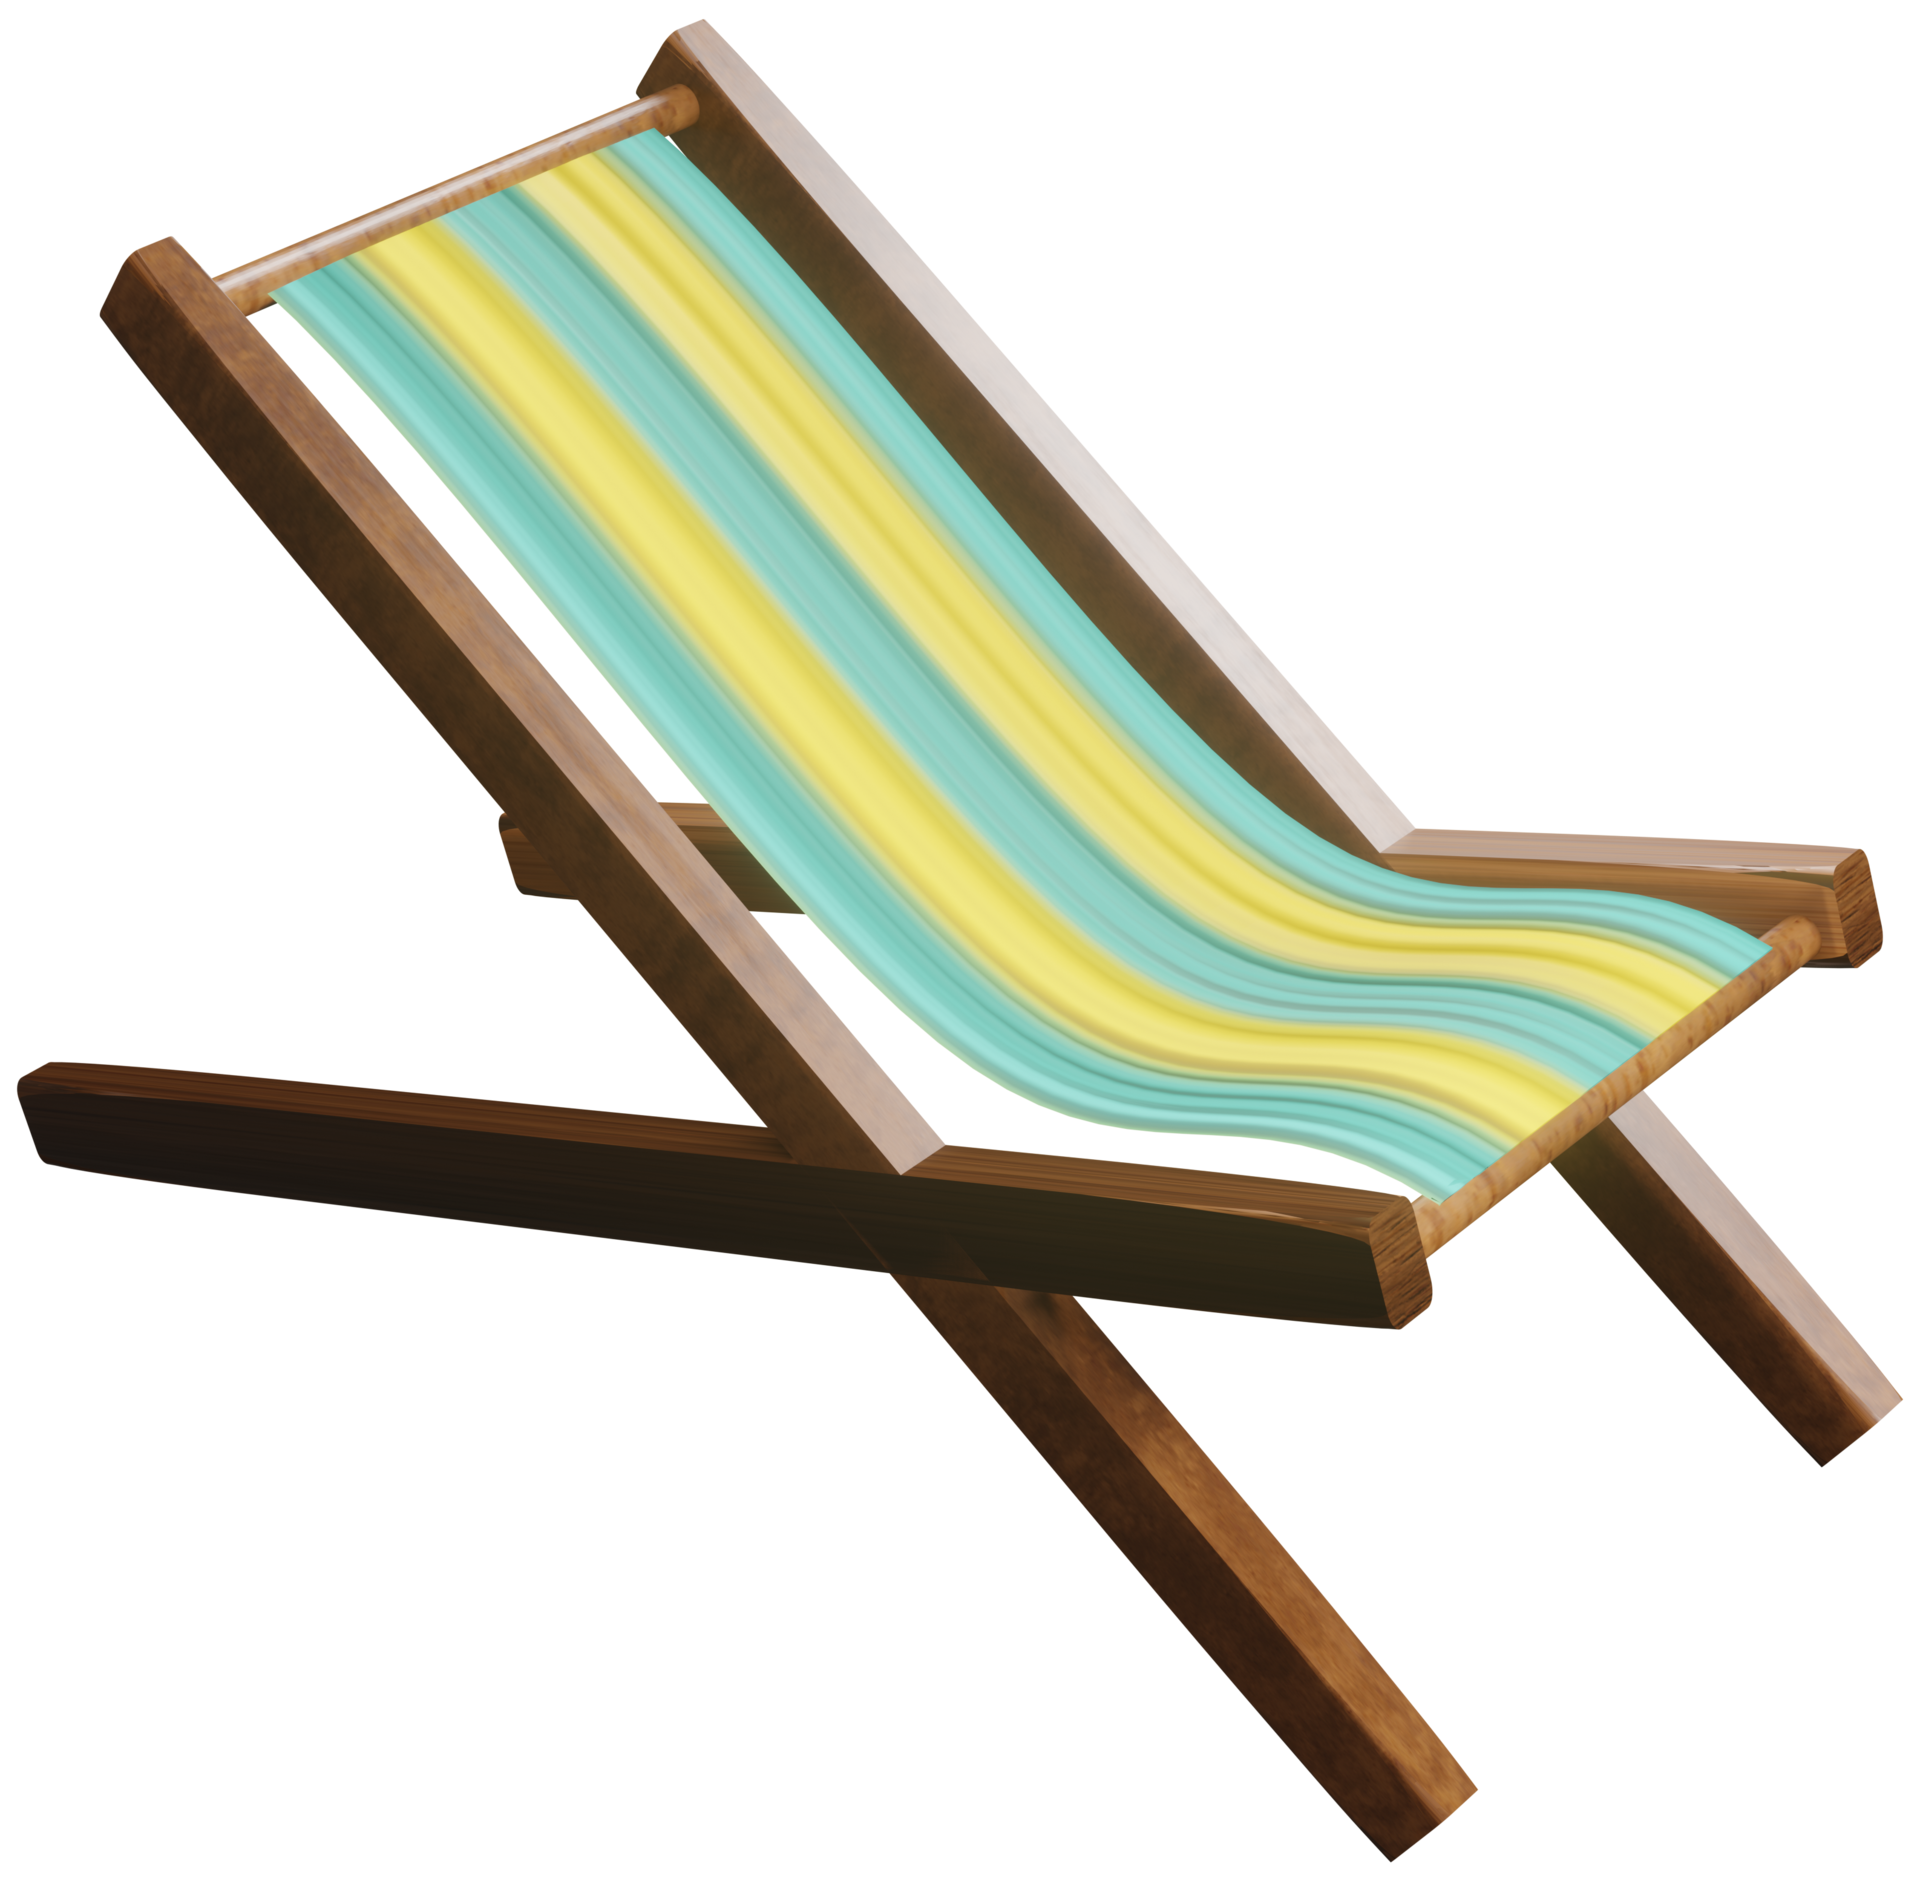 3D model of a wooden deck chair toy on a transparent background ...